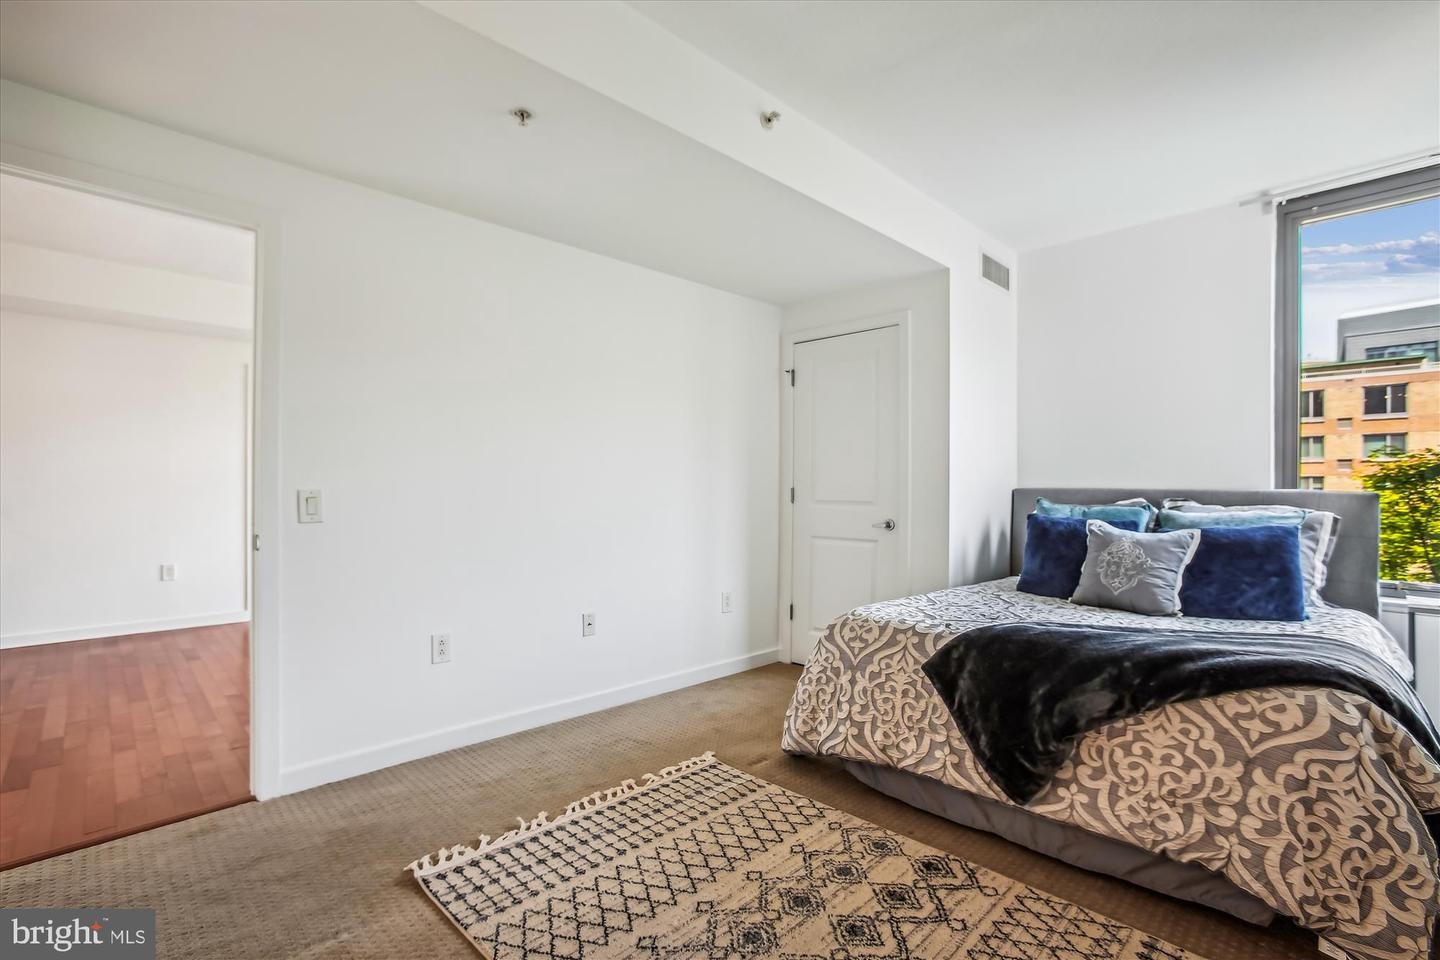 30. 475 K St NW 